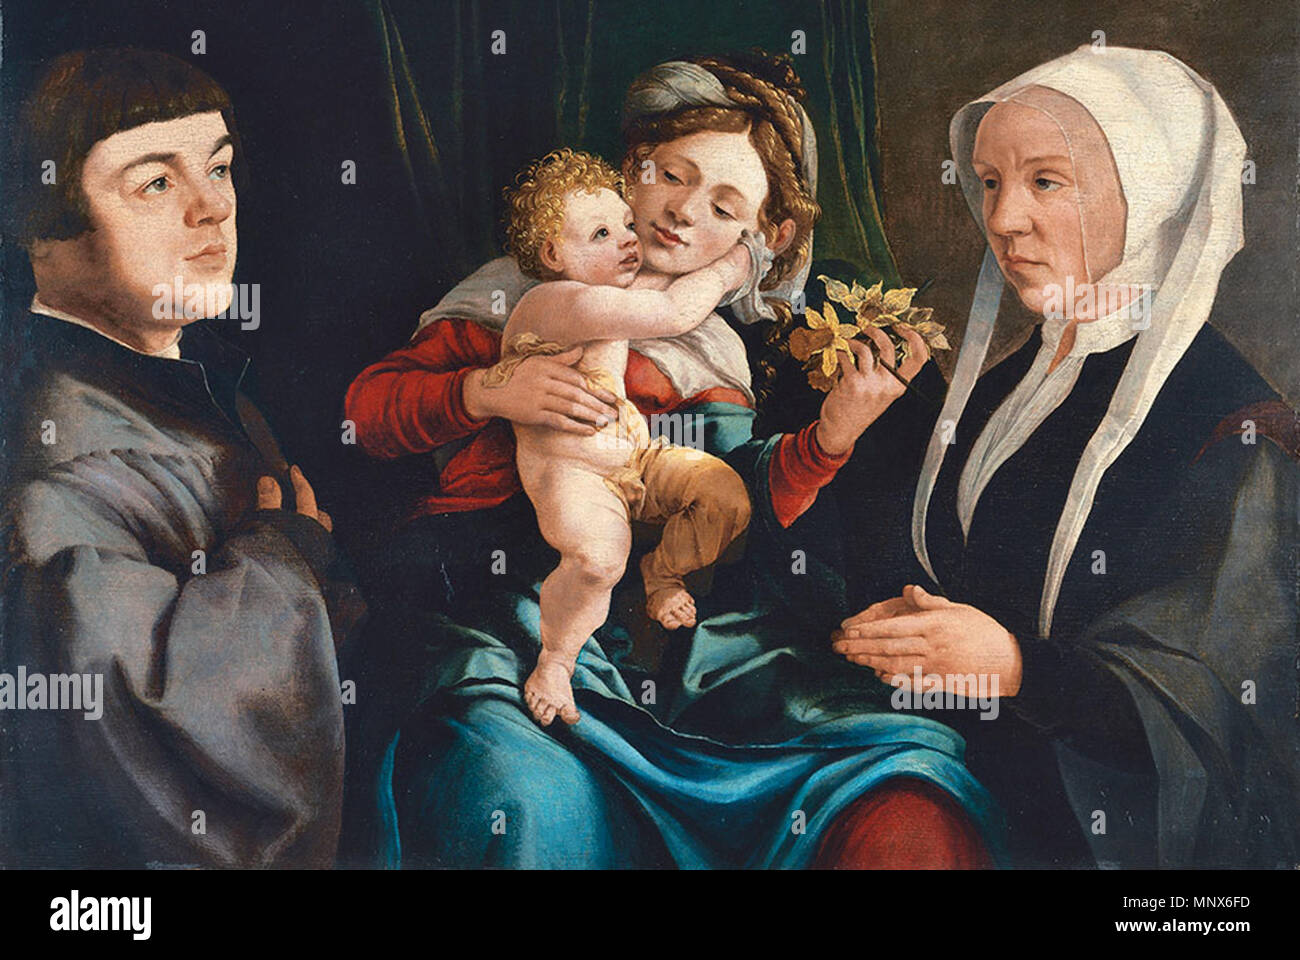 . Madonna of the Daffodils with the Child and Donors . circa 1535.    Jan van Scorel  (1495–1562)     Alternative names Jan van Schoorel, Jan van Schoorl, Jan van Schoreel, Jan van Schorel, Jan van Scoreel, Jan van Scorelius, Jan van Scorellius  Description Dutch painter and draughtsman  Date of birth/death 1 August 1495 6 December 1552  Location of birth/death Schoorl Utrecht  Work location Haarlem (ca. 1517-1518), Venice (1518-1522), Rome (1522-1524), Utrecht (1524-1528), Haarlem (1528), Utrecht (1529-1551), Ghent (1550), Obervellach  Authority control  : Q282708 VIAF: 59356315 ISNI: 0000 00 Stock Photo